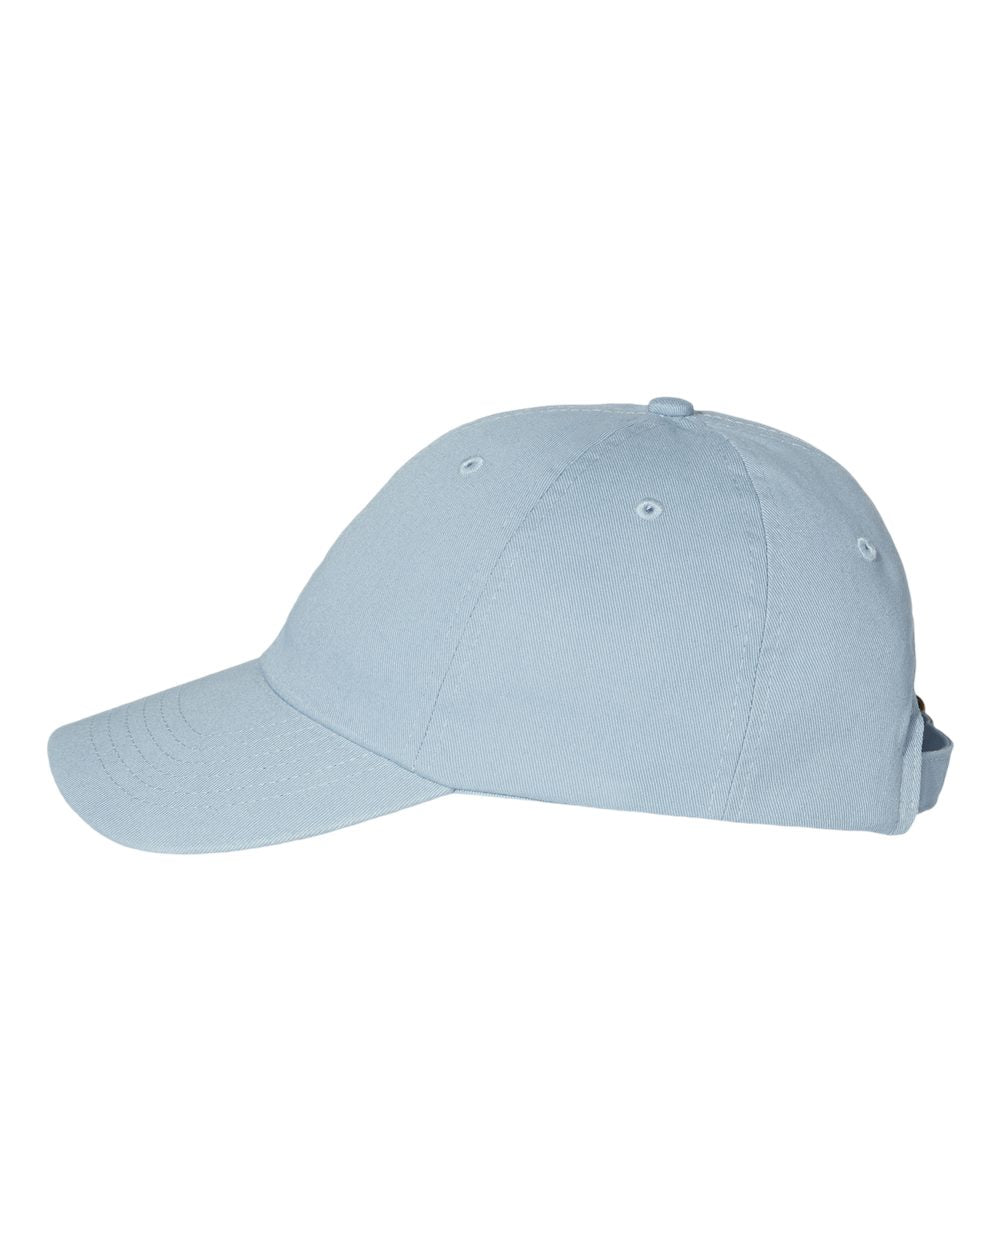 Custom Embroidered Dad Hats - 100% Cotton 6-Panel Twill Cap with Adjustable Enclosure.